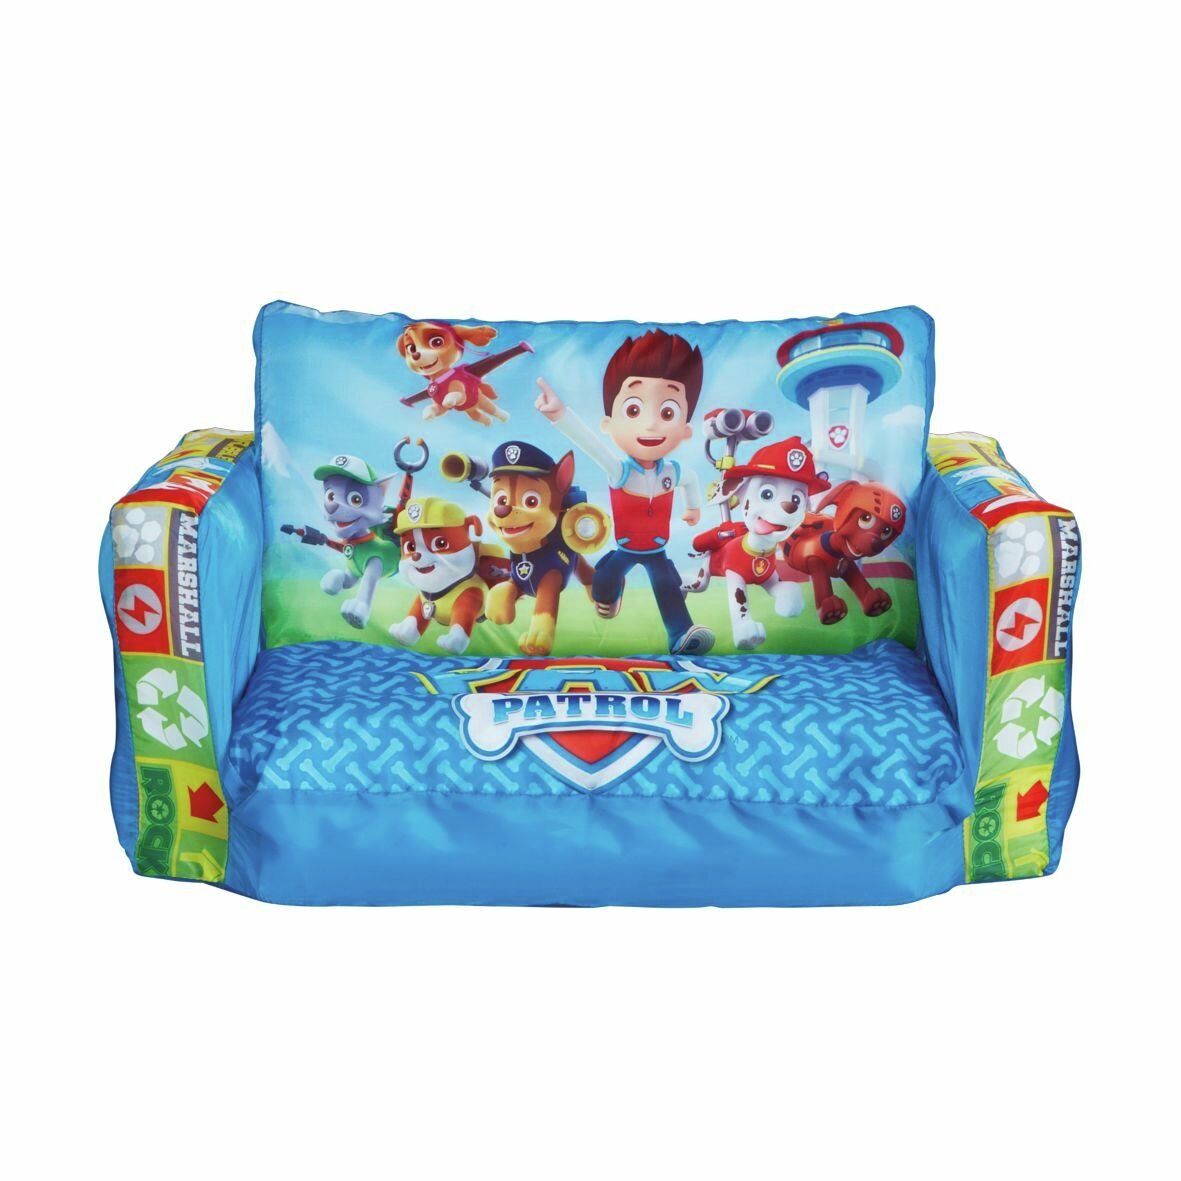 paw patrol kid couch